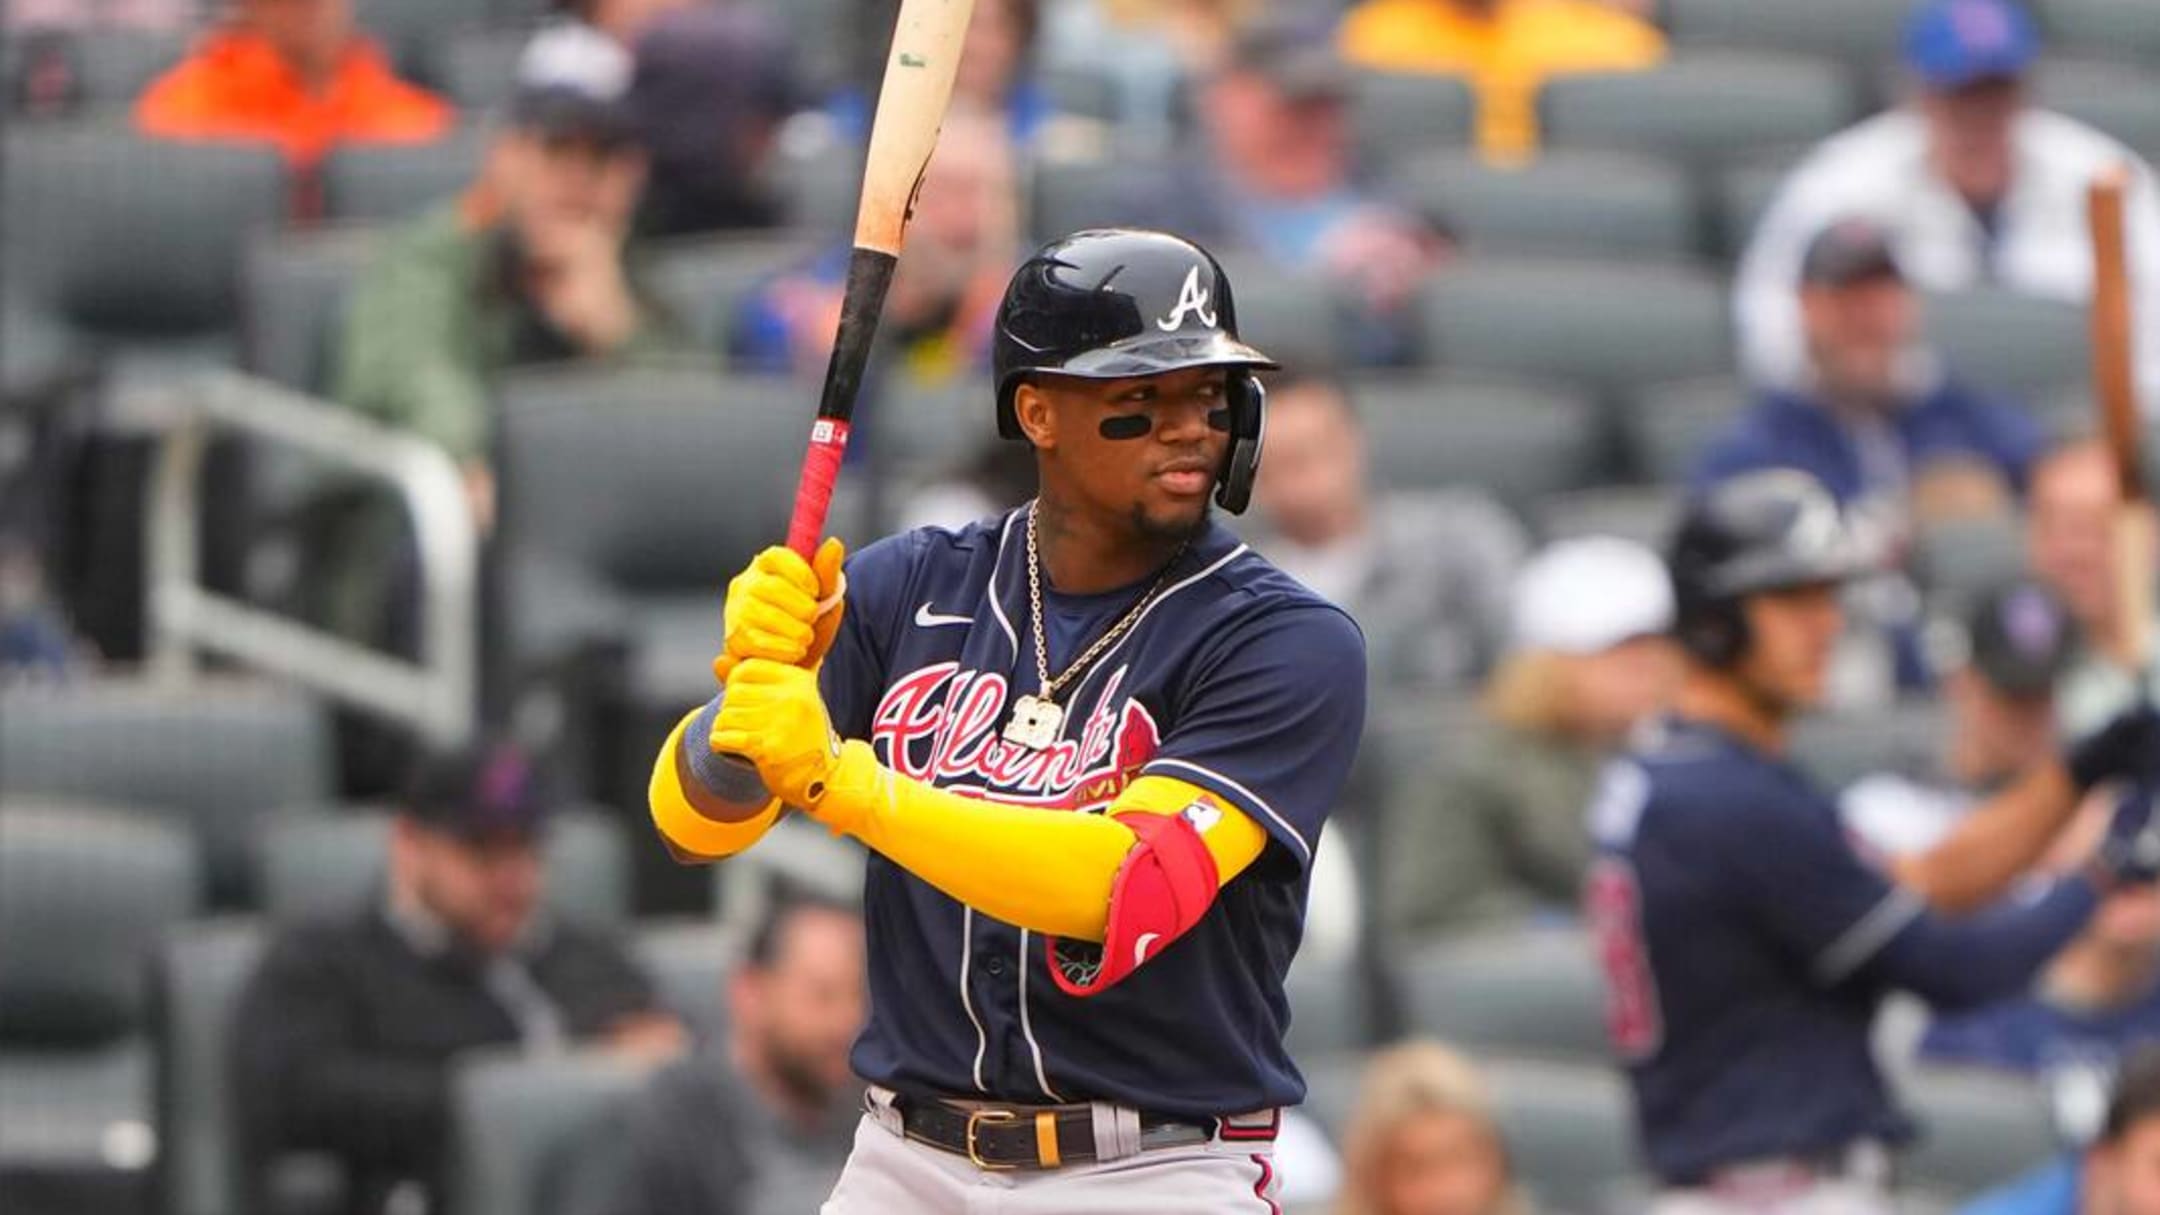 Ronald Acuña Jr. CRUSHES his first HR of season while FALLING DOWN! 